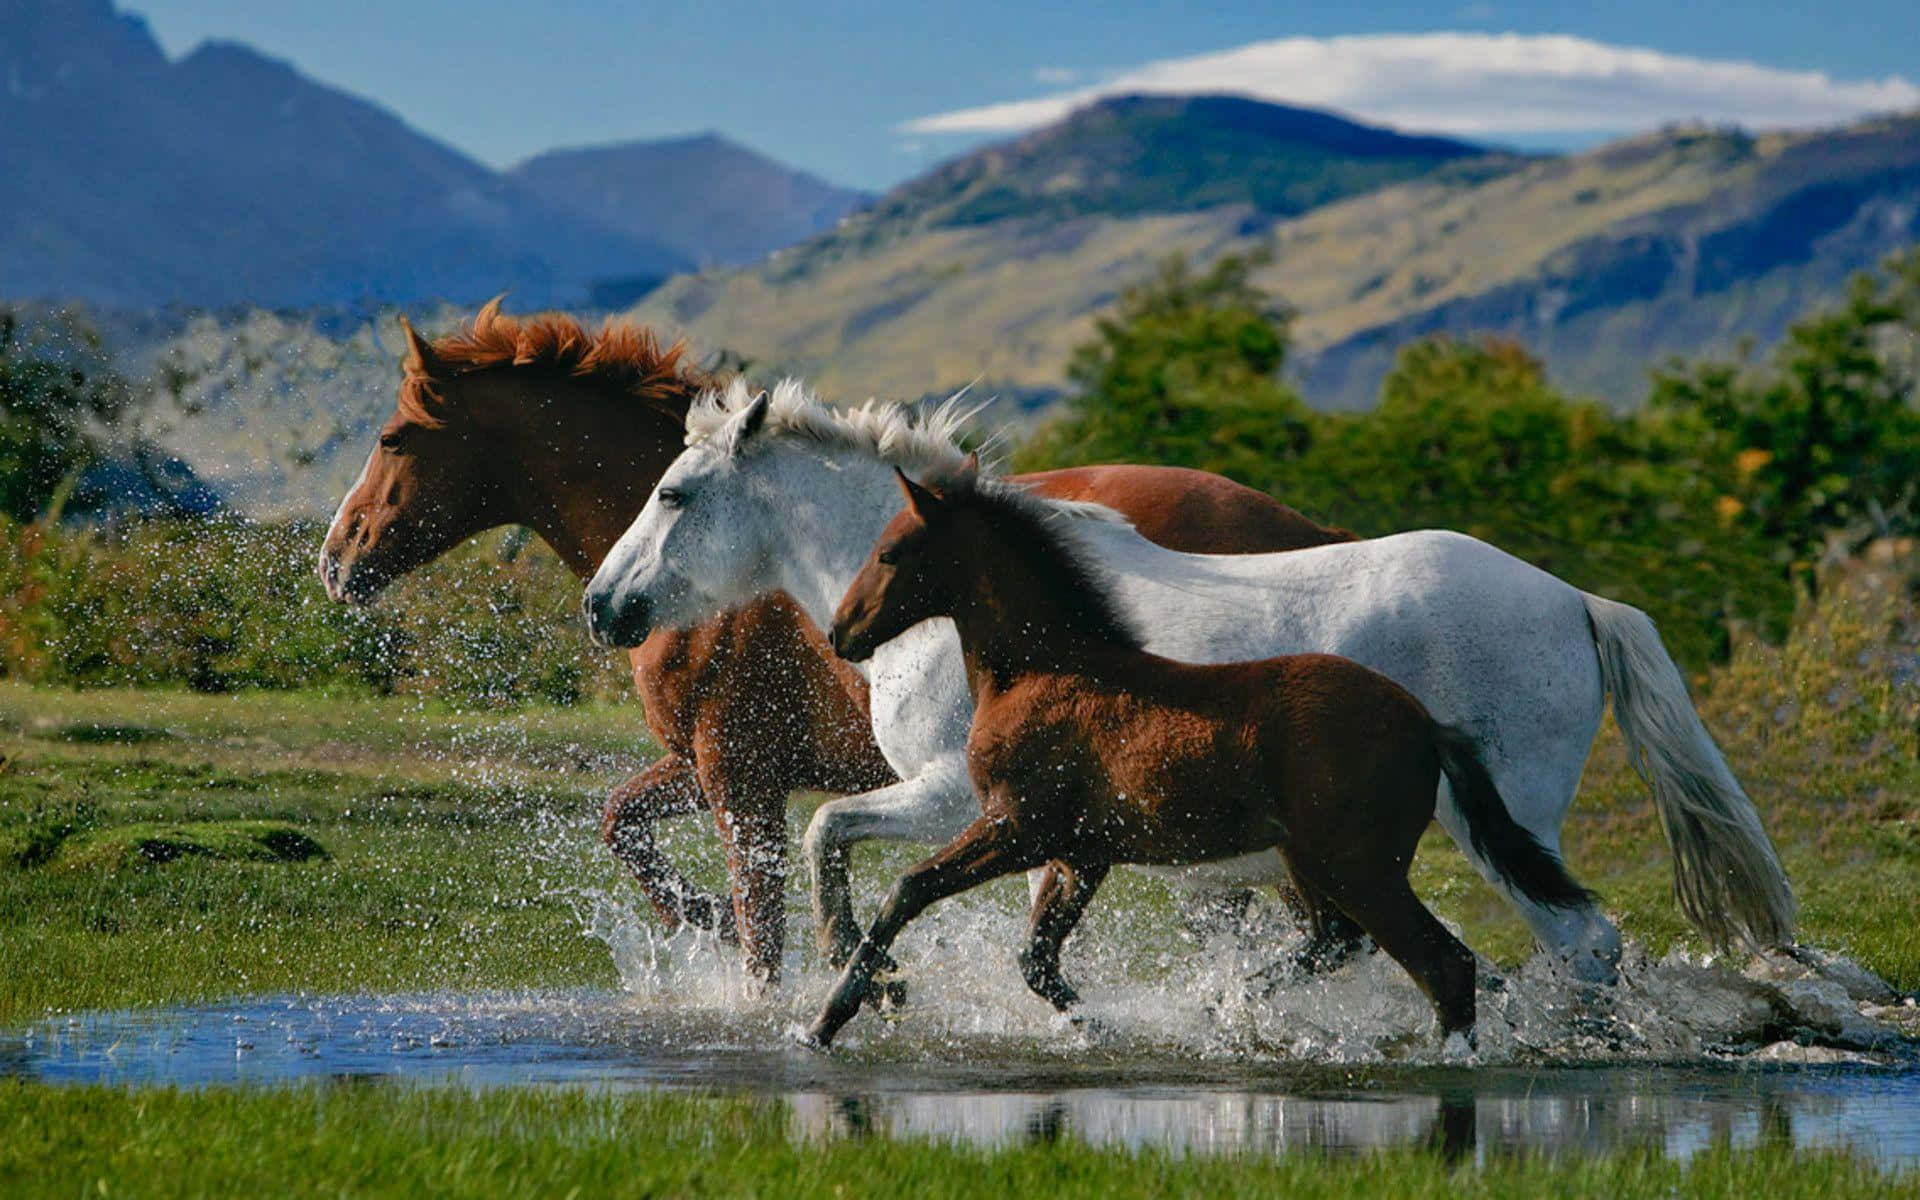 "A beautiful chestnut horse running atop vibrant green meadow"